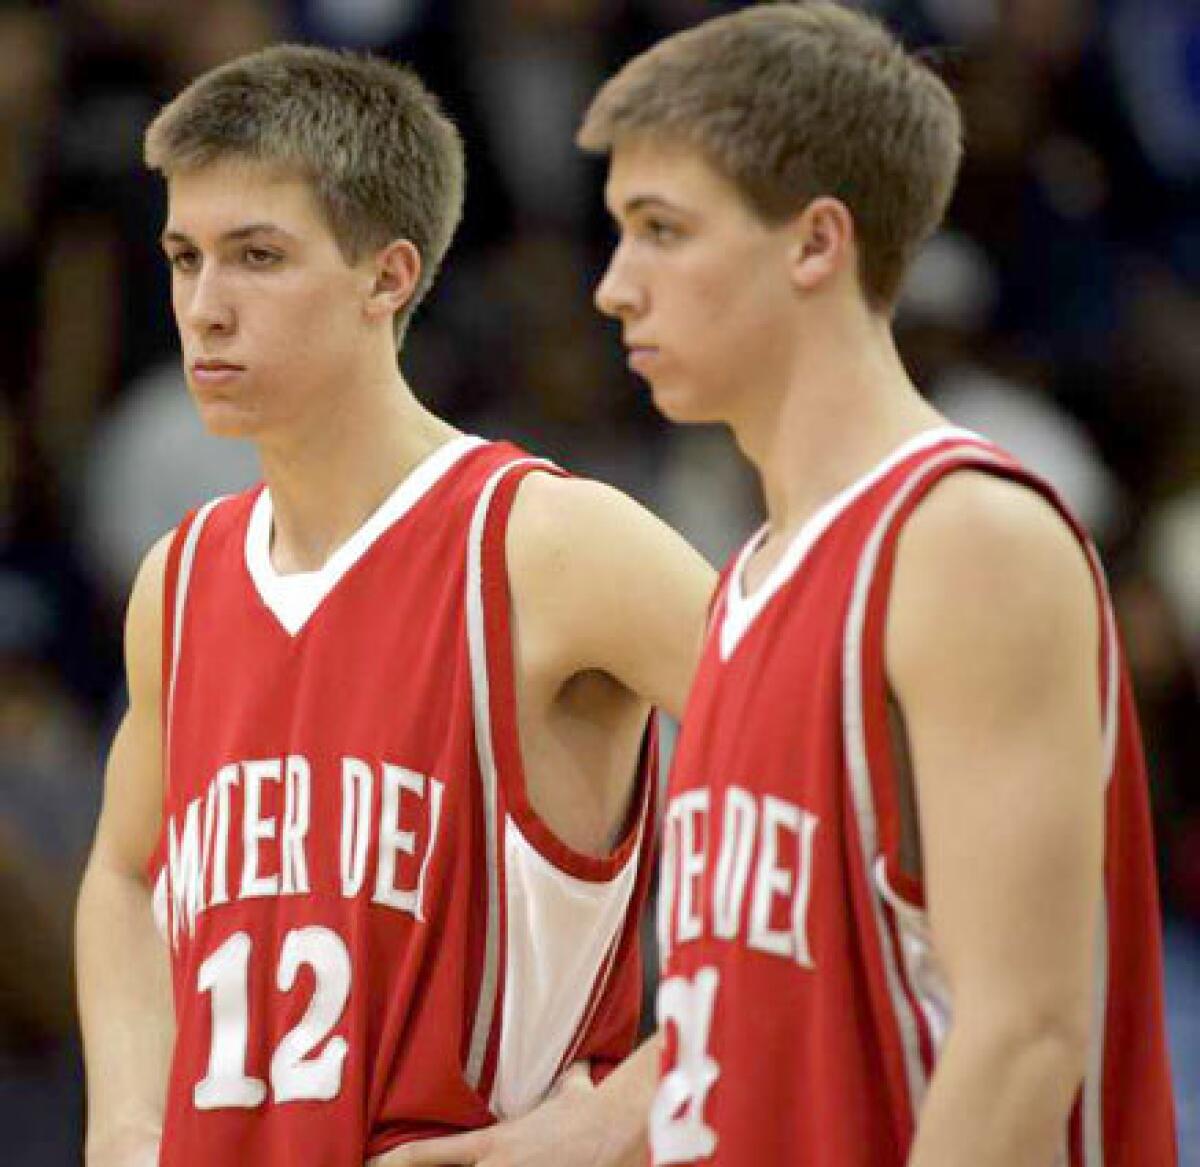 Identical twins David, left, and Travis Wear are sophomore starters at Mater Dei.